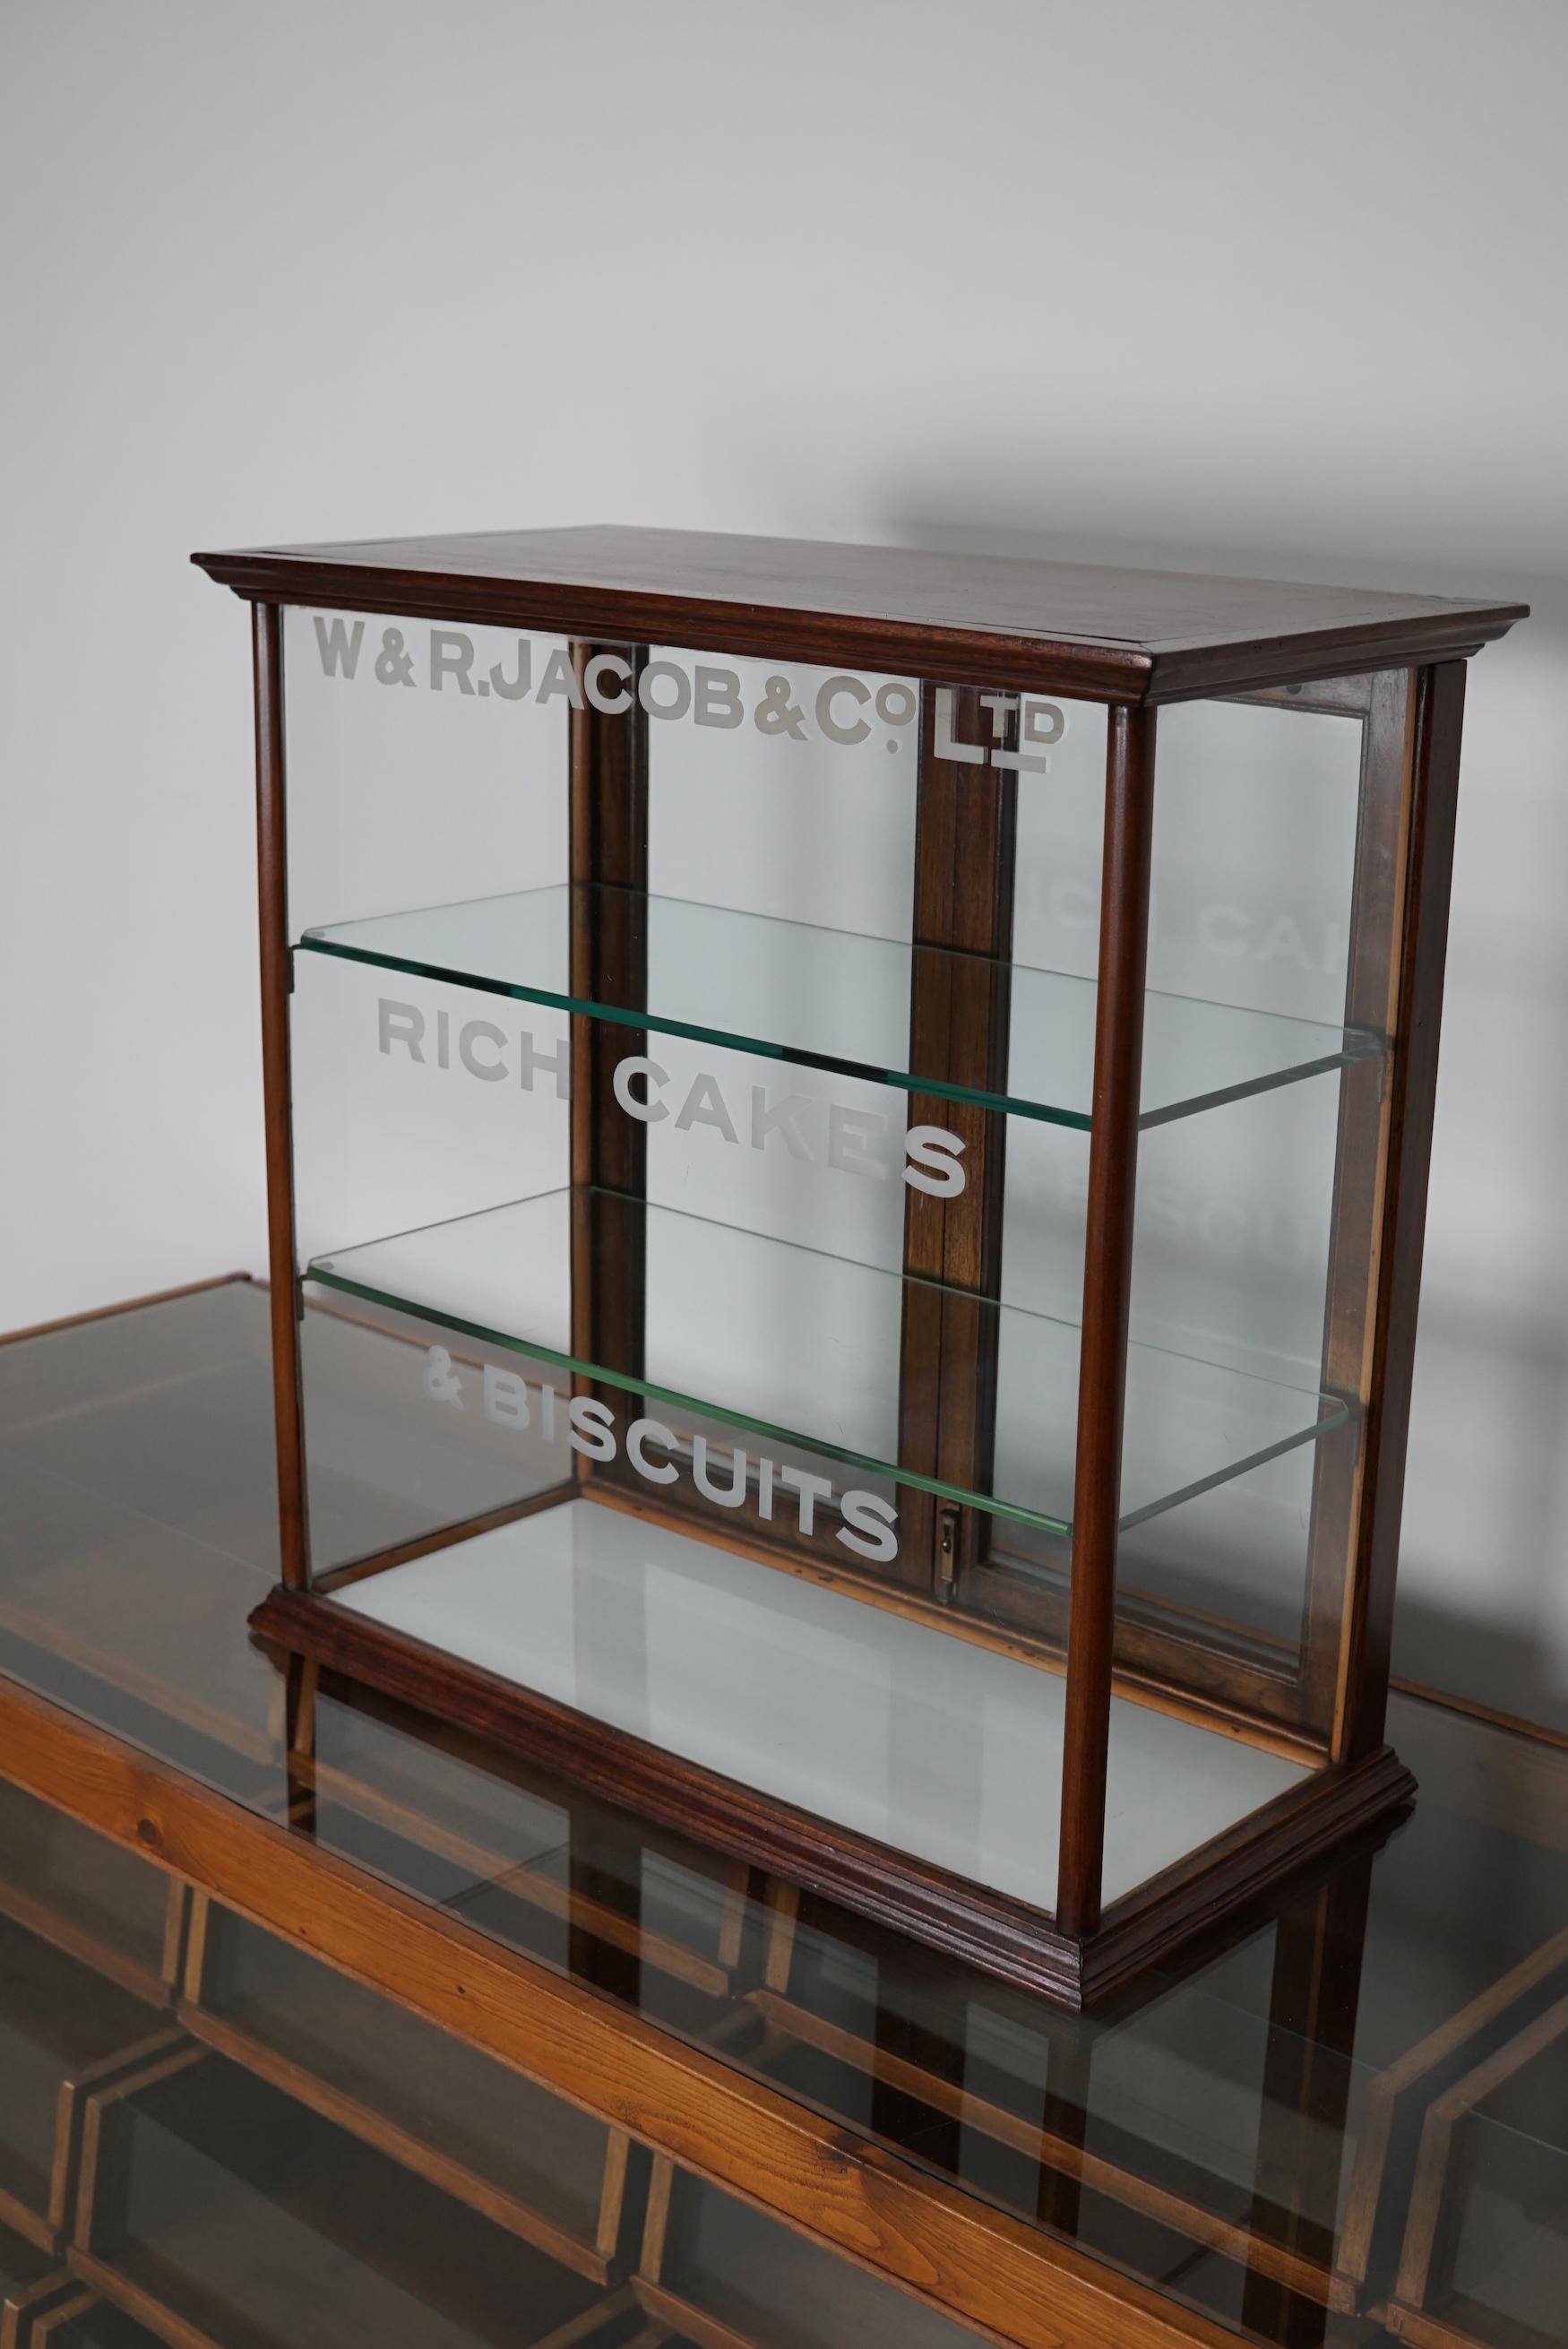 Victorian Mahogany Counter Top Cake & Biscuits Shop Display Cabinet, circa 1900 For Sale